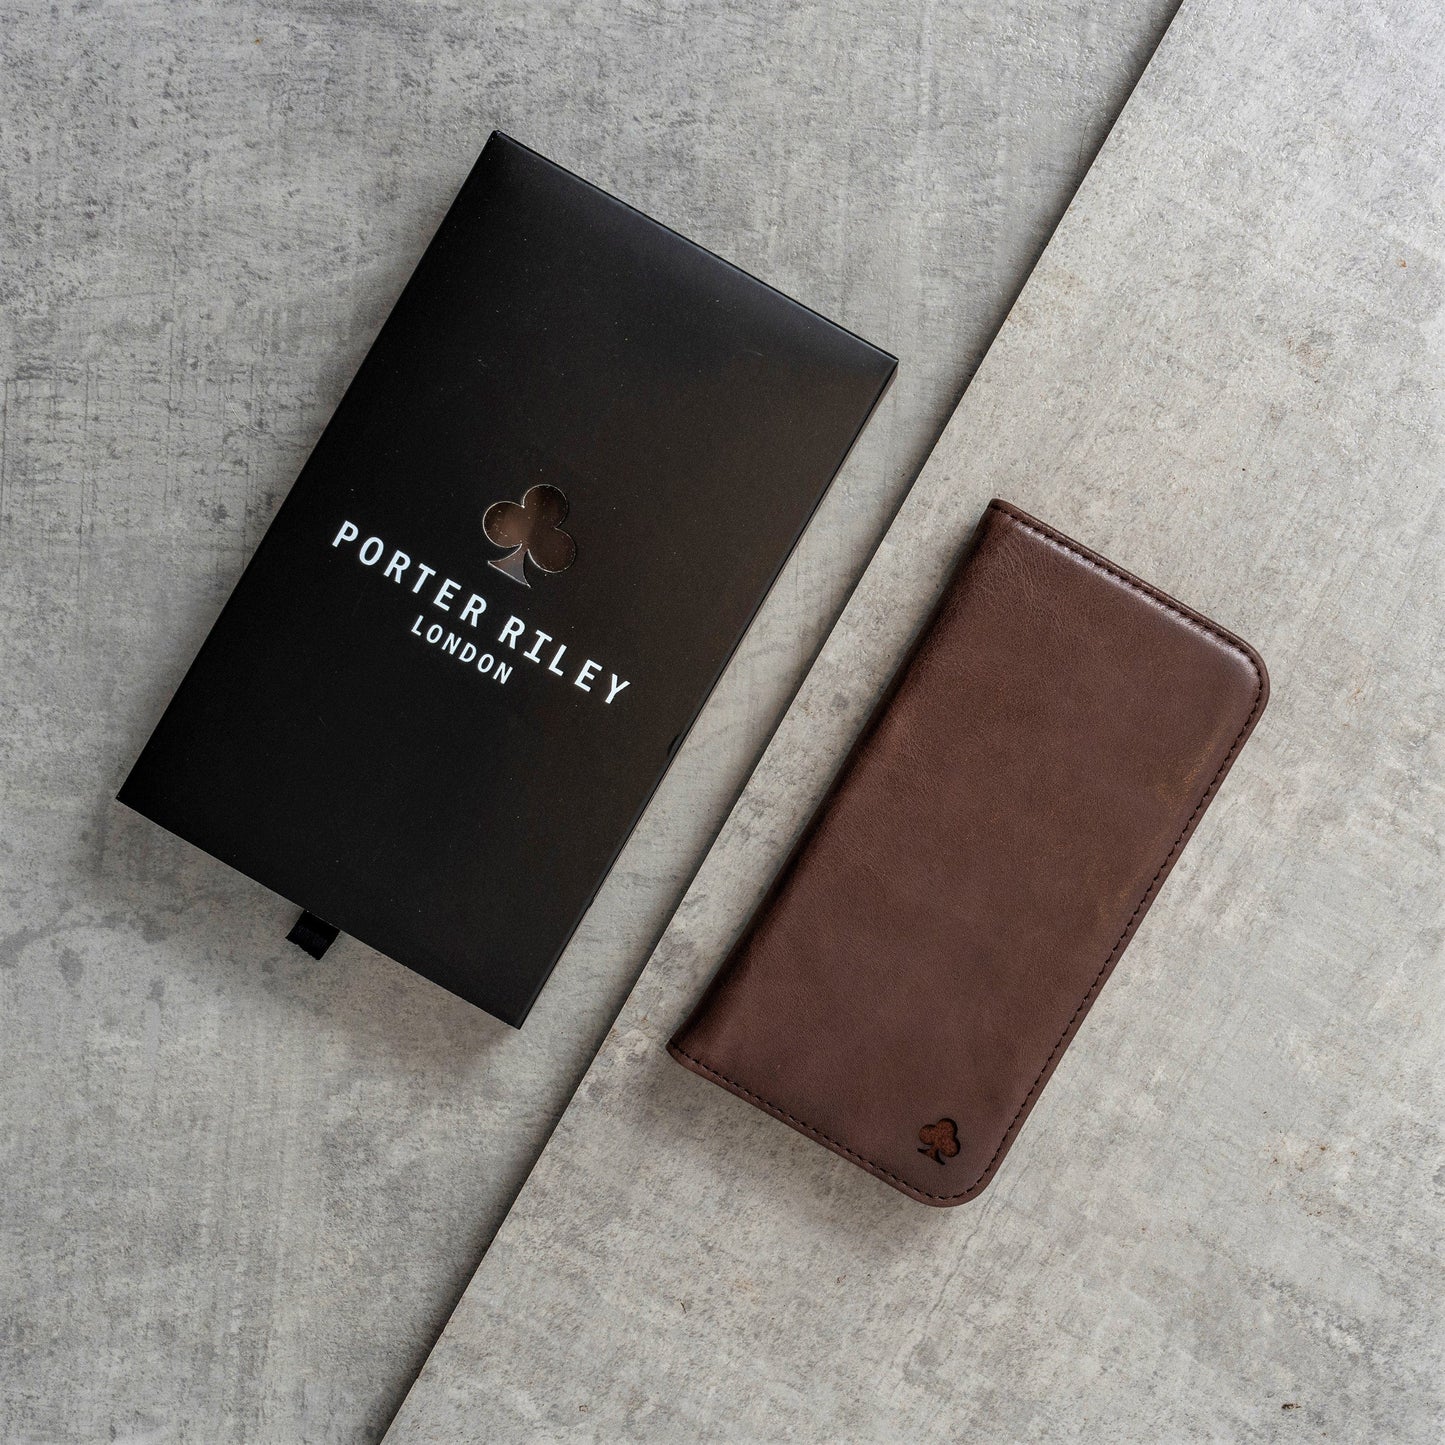 Huawei P20 Pro Leather Case. Premium Slim Genuine Leather Stand Case/Cover/Wallet (Chocolate Brown)